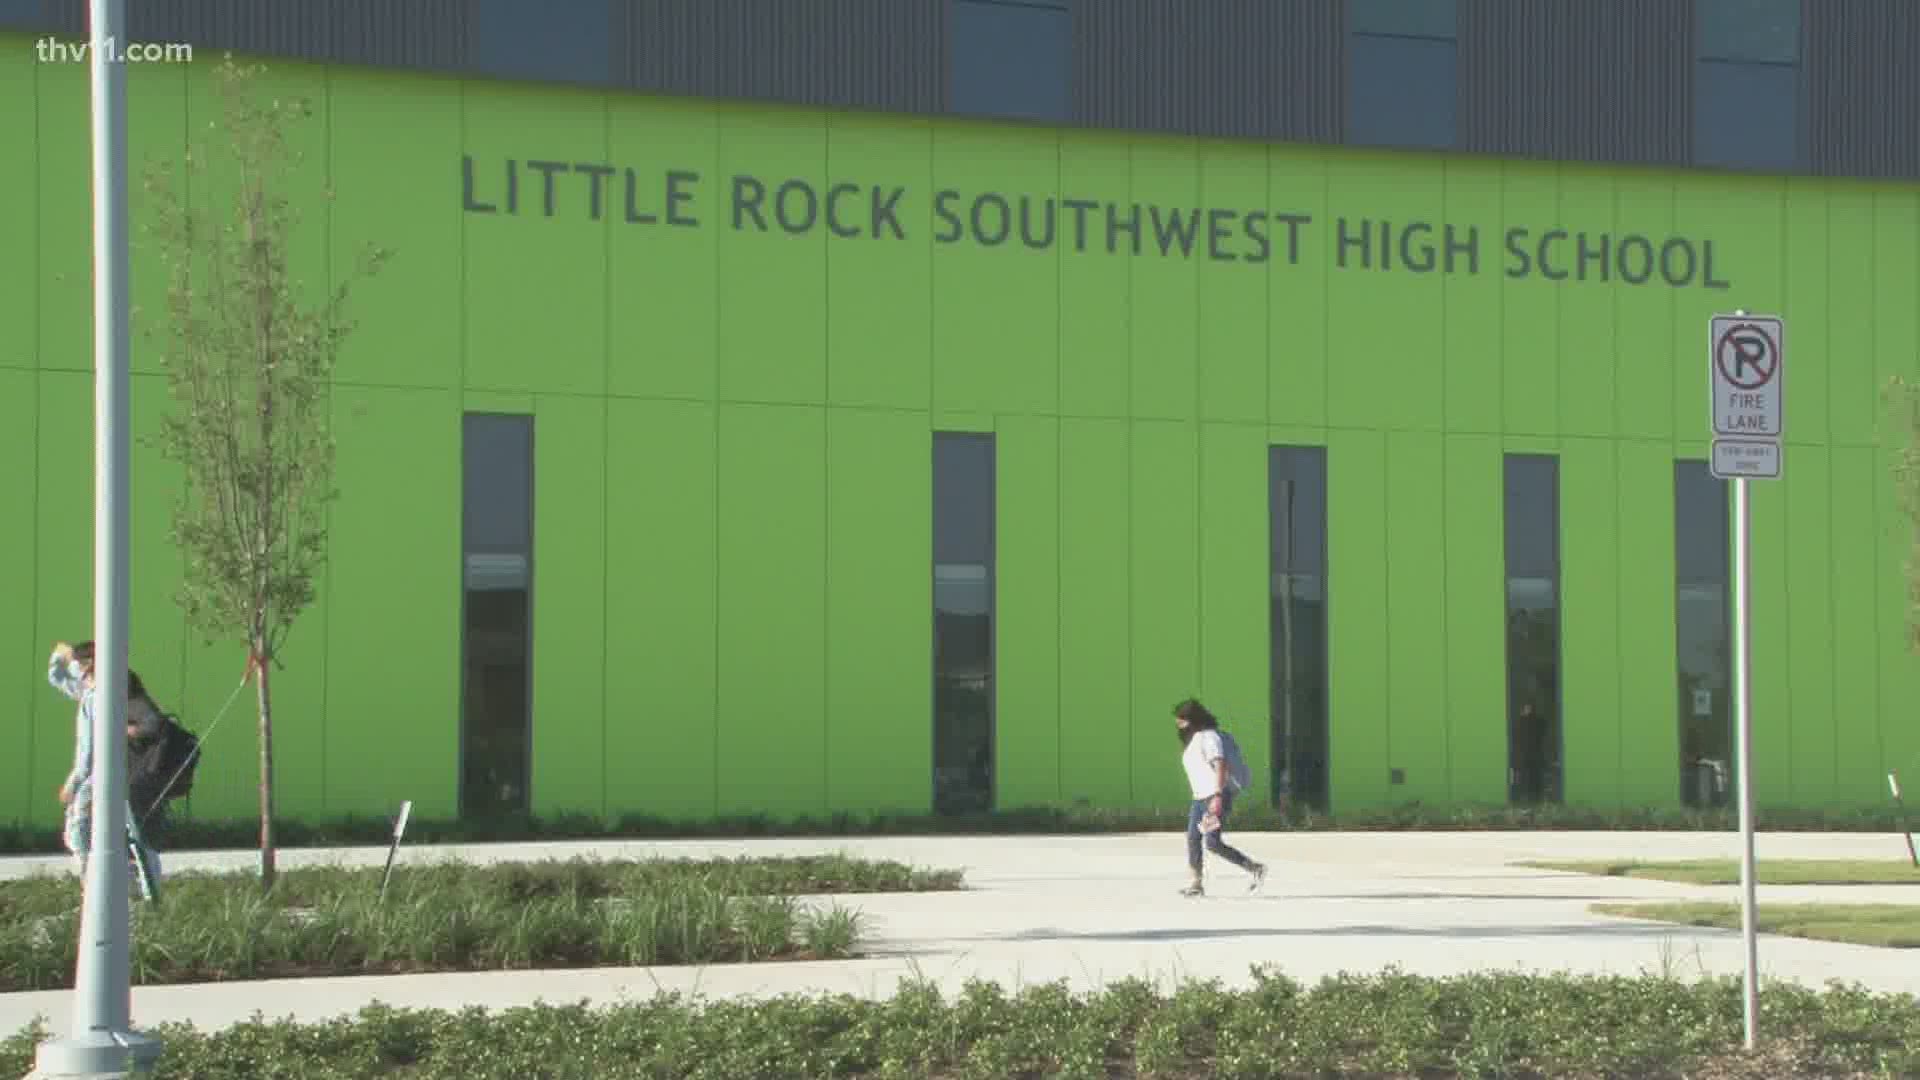 While many around Arkansas have been prepped for the very unusual return to class, the Little Rock School District still had plenty of unknowns.